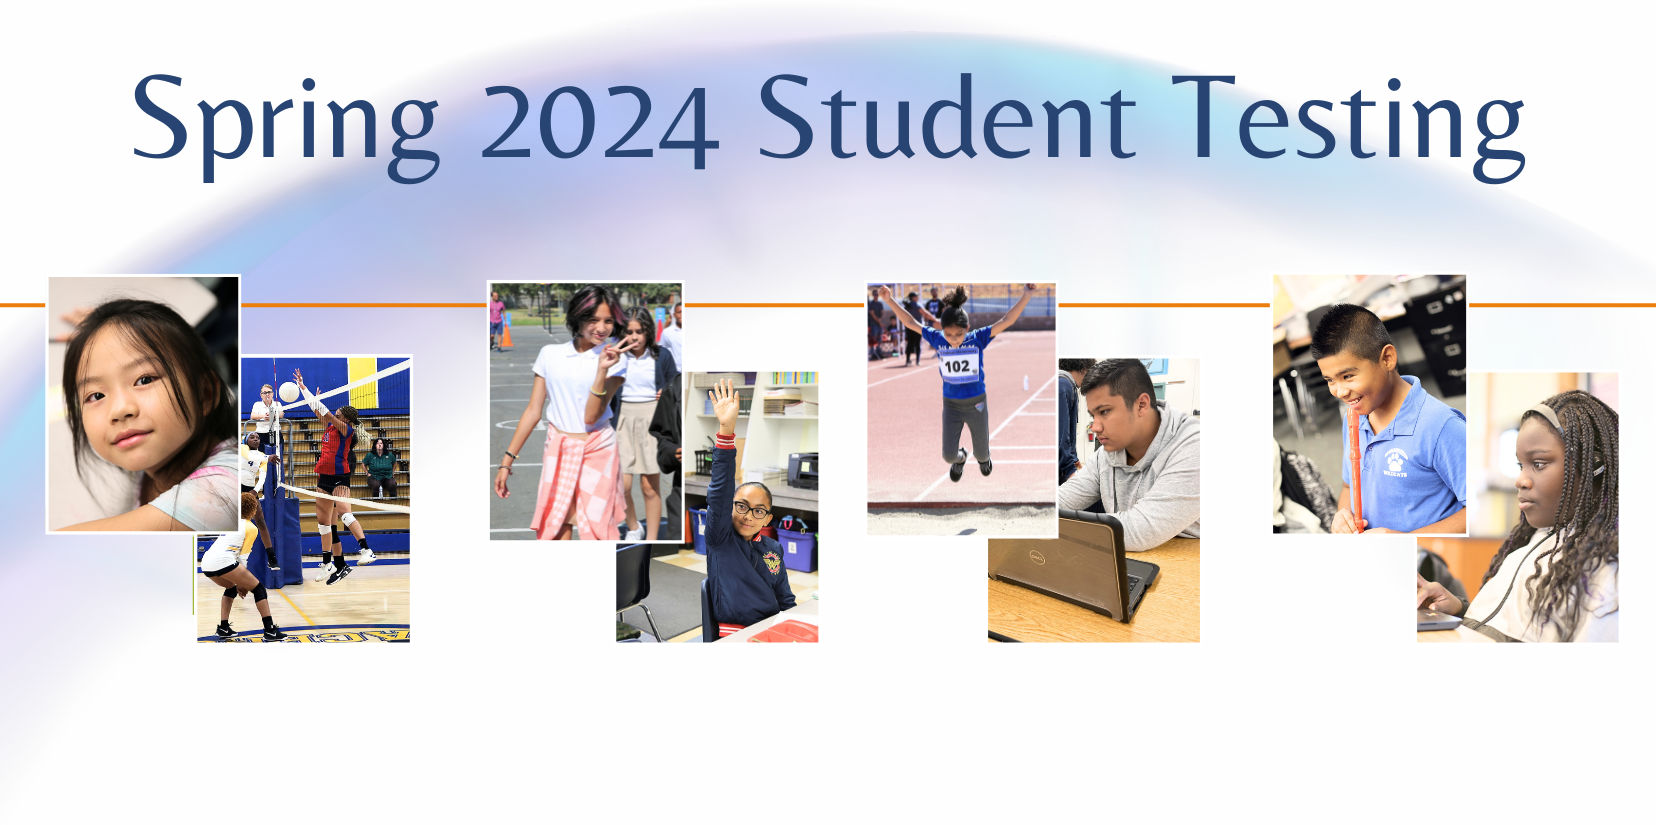 Spring 2024 Student Testing student smiling, play sports and musical instrument